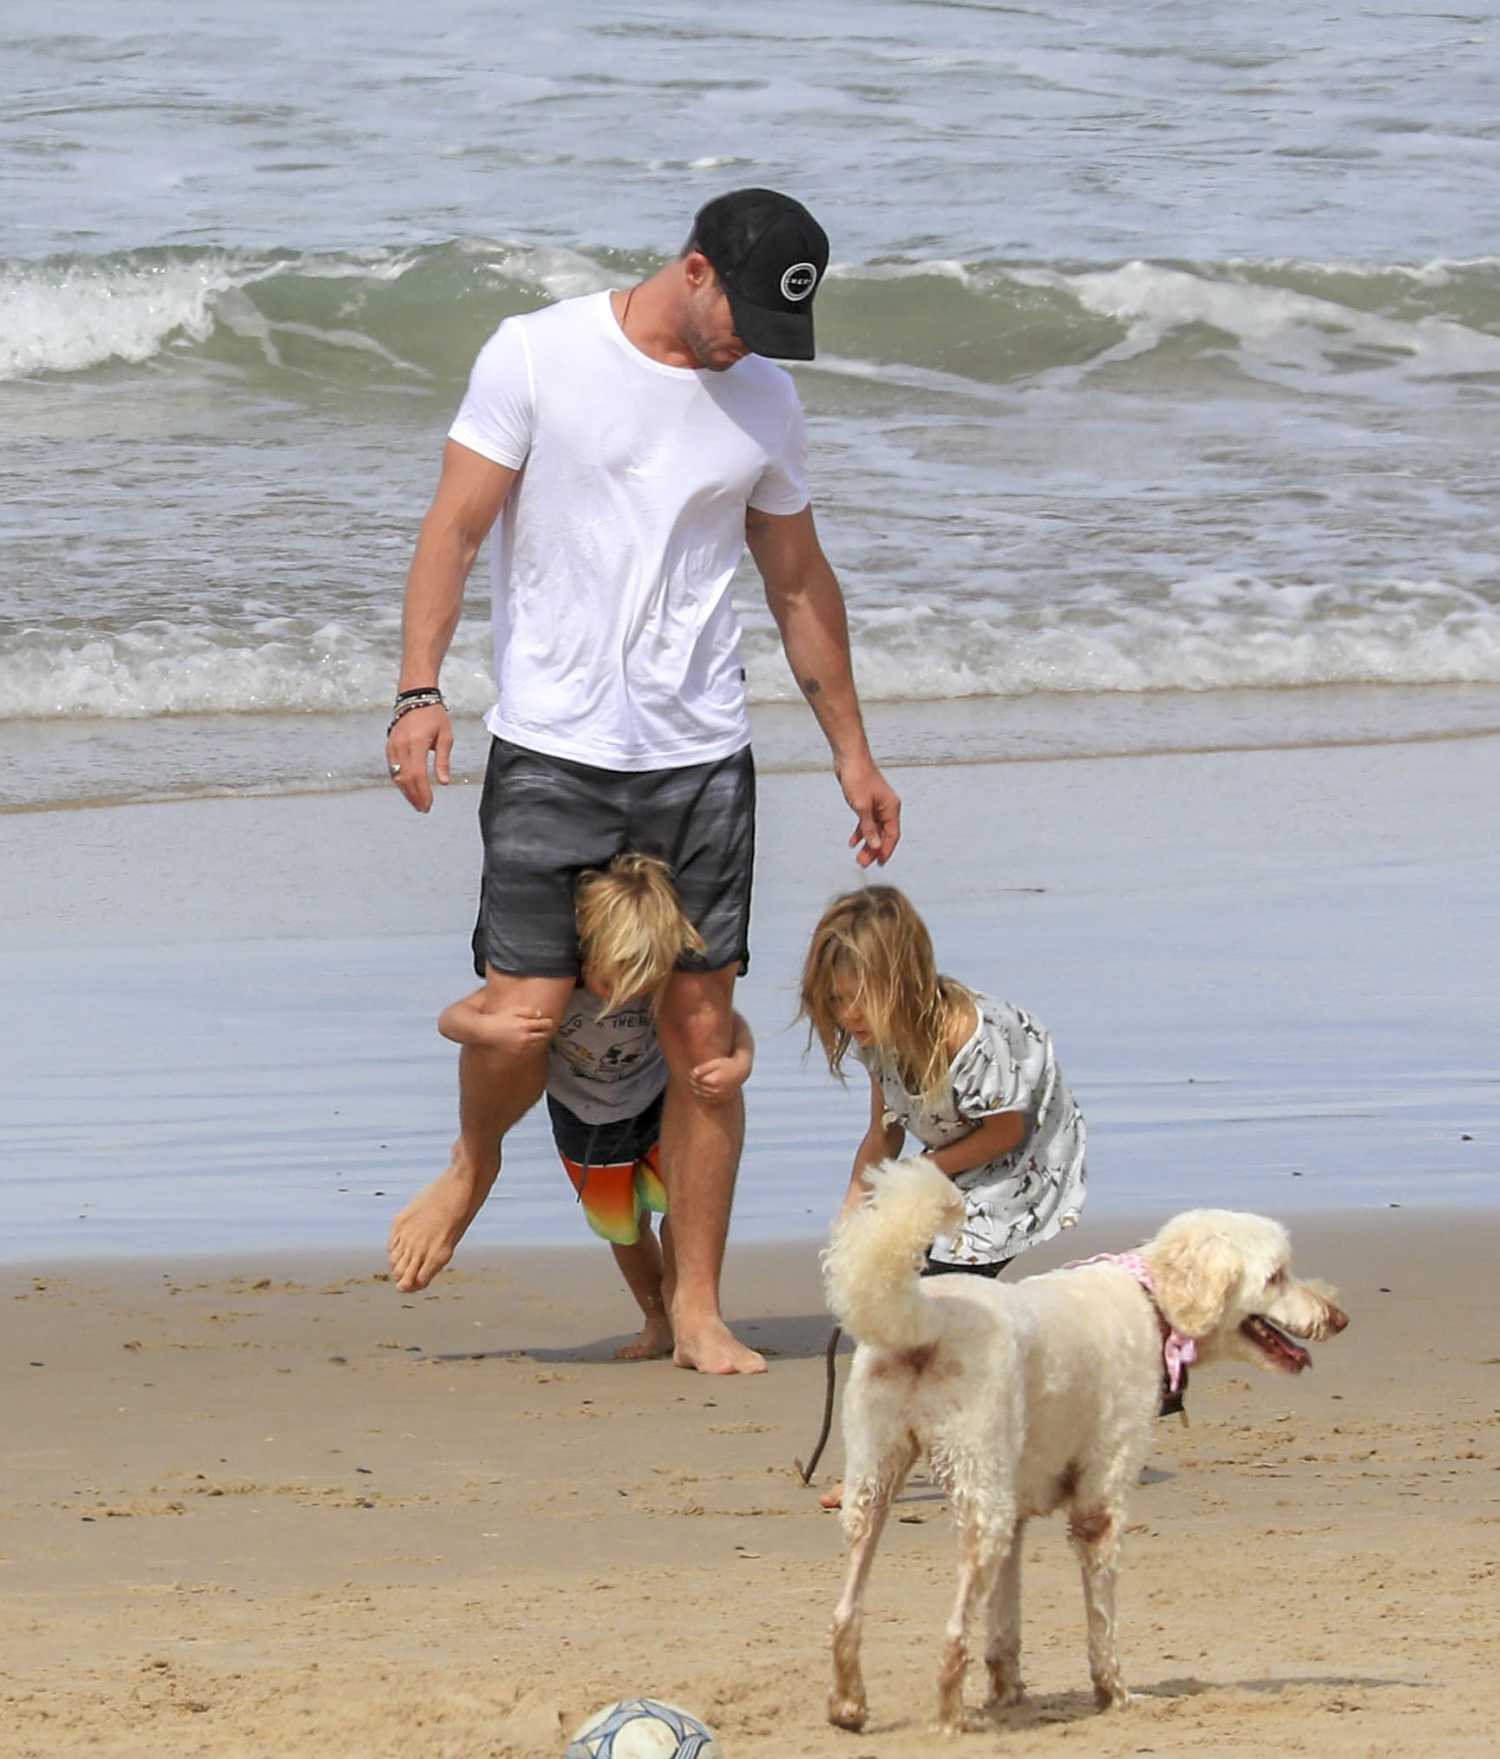 Chris Hemsworth Was Seen Out with Elsa Pataky on the Beach in Byron Bay 04/13/2019